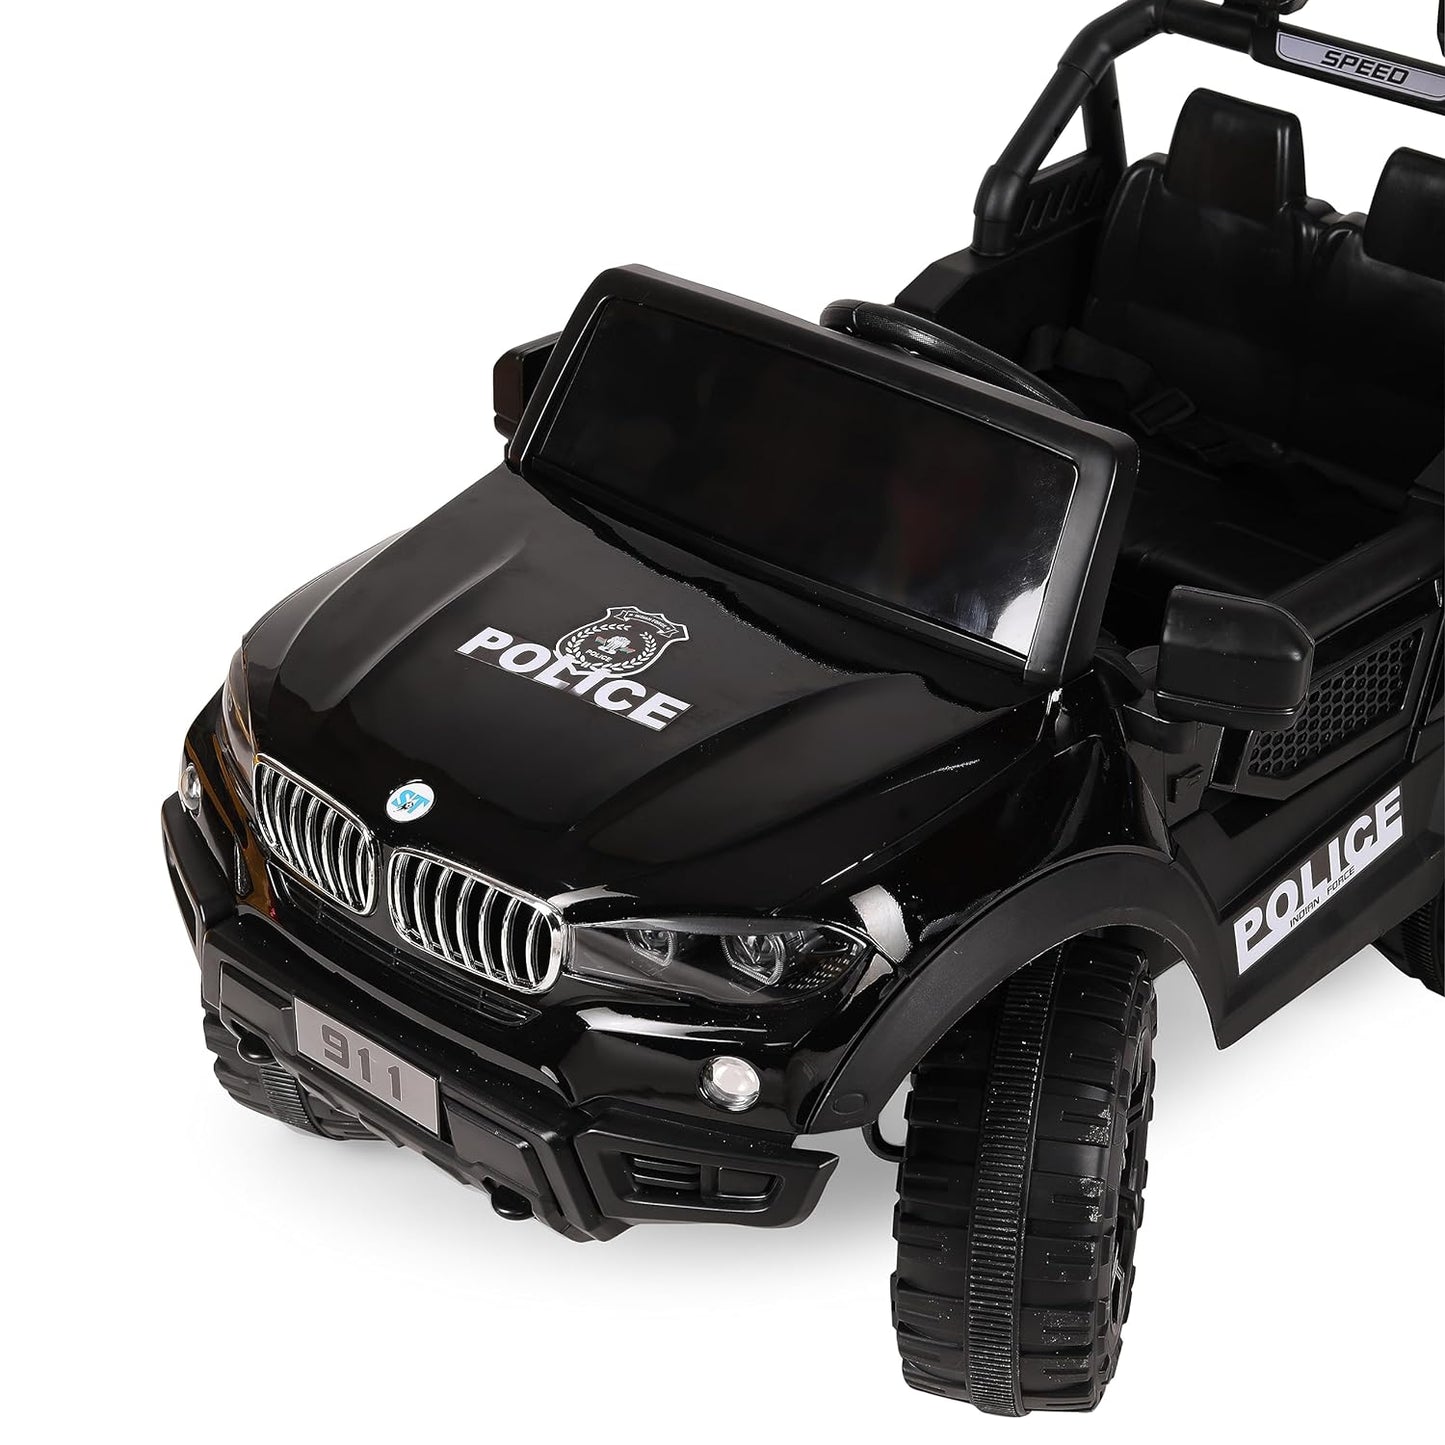 GettBoles Electric Battery Operated Ride on Jeep for Kids of Age 2 to 6 Years- The Metallic Painted Driving Ride on Car with Music, Lights and Bluetooth Remote Control (Black)